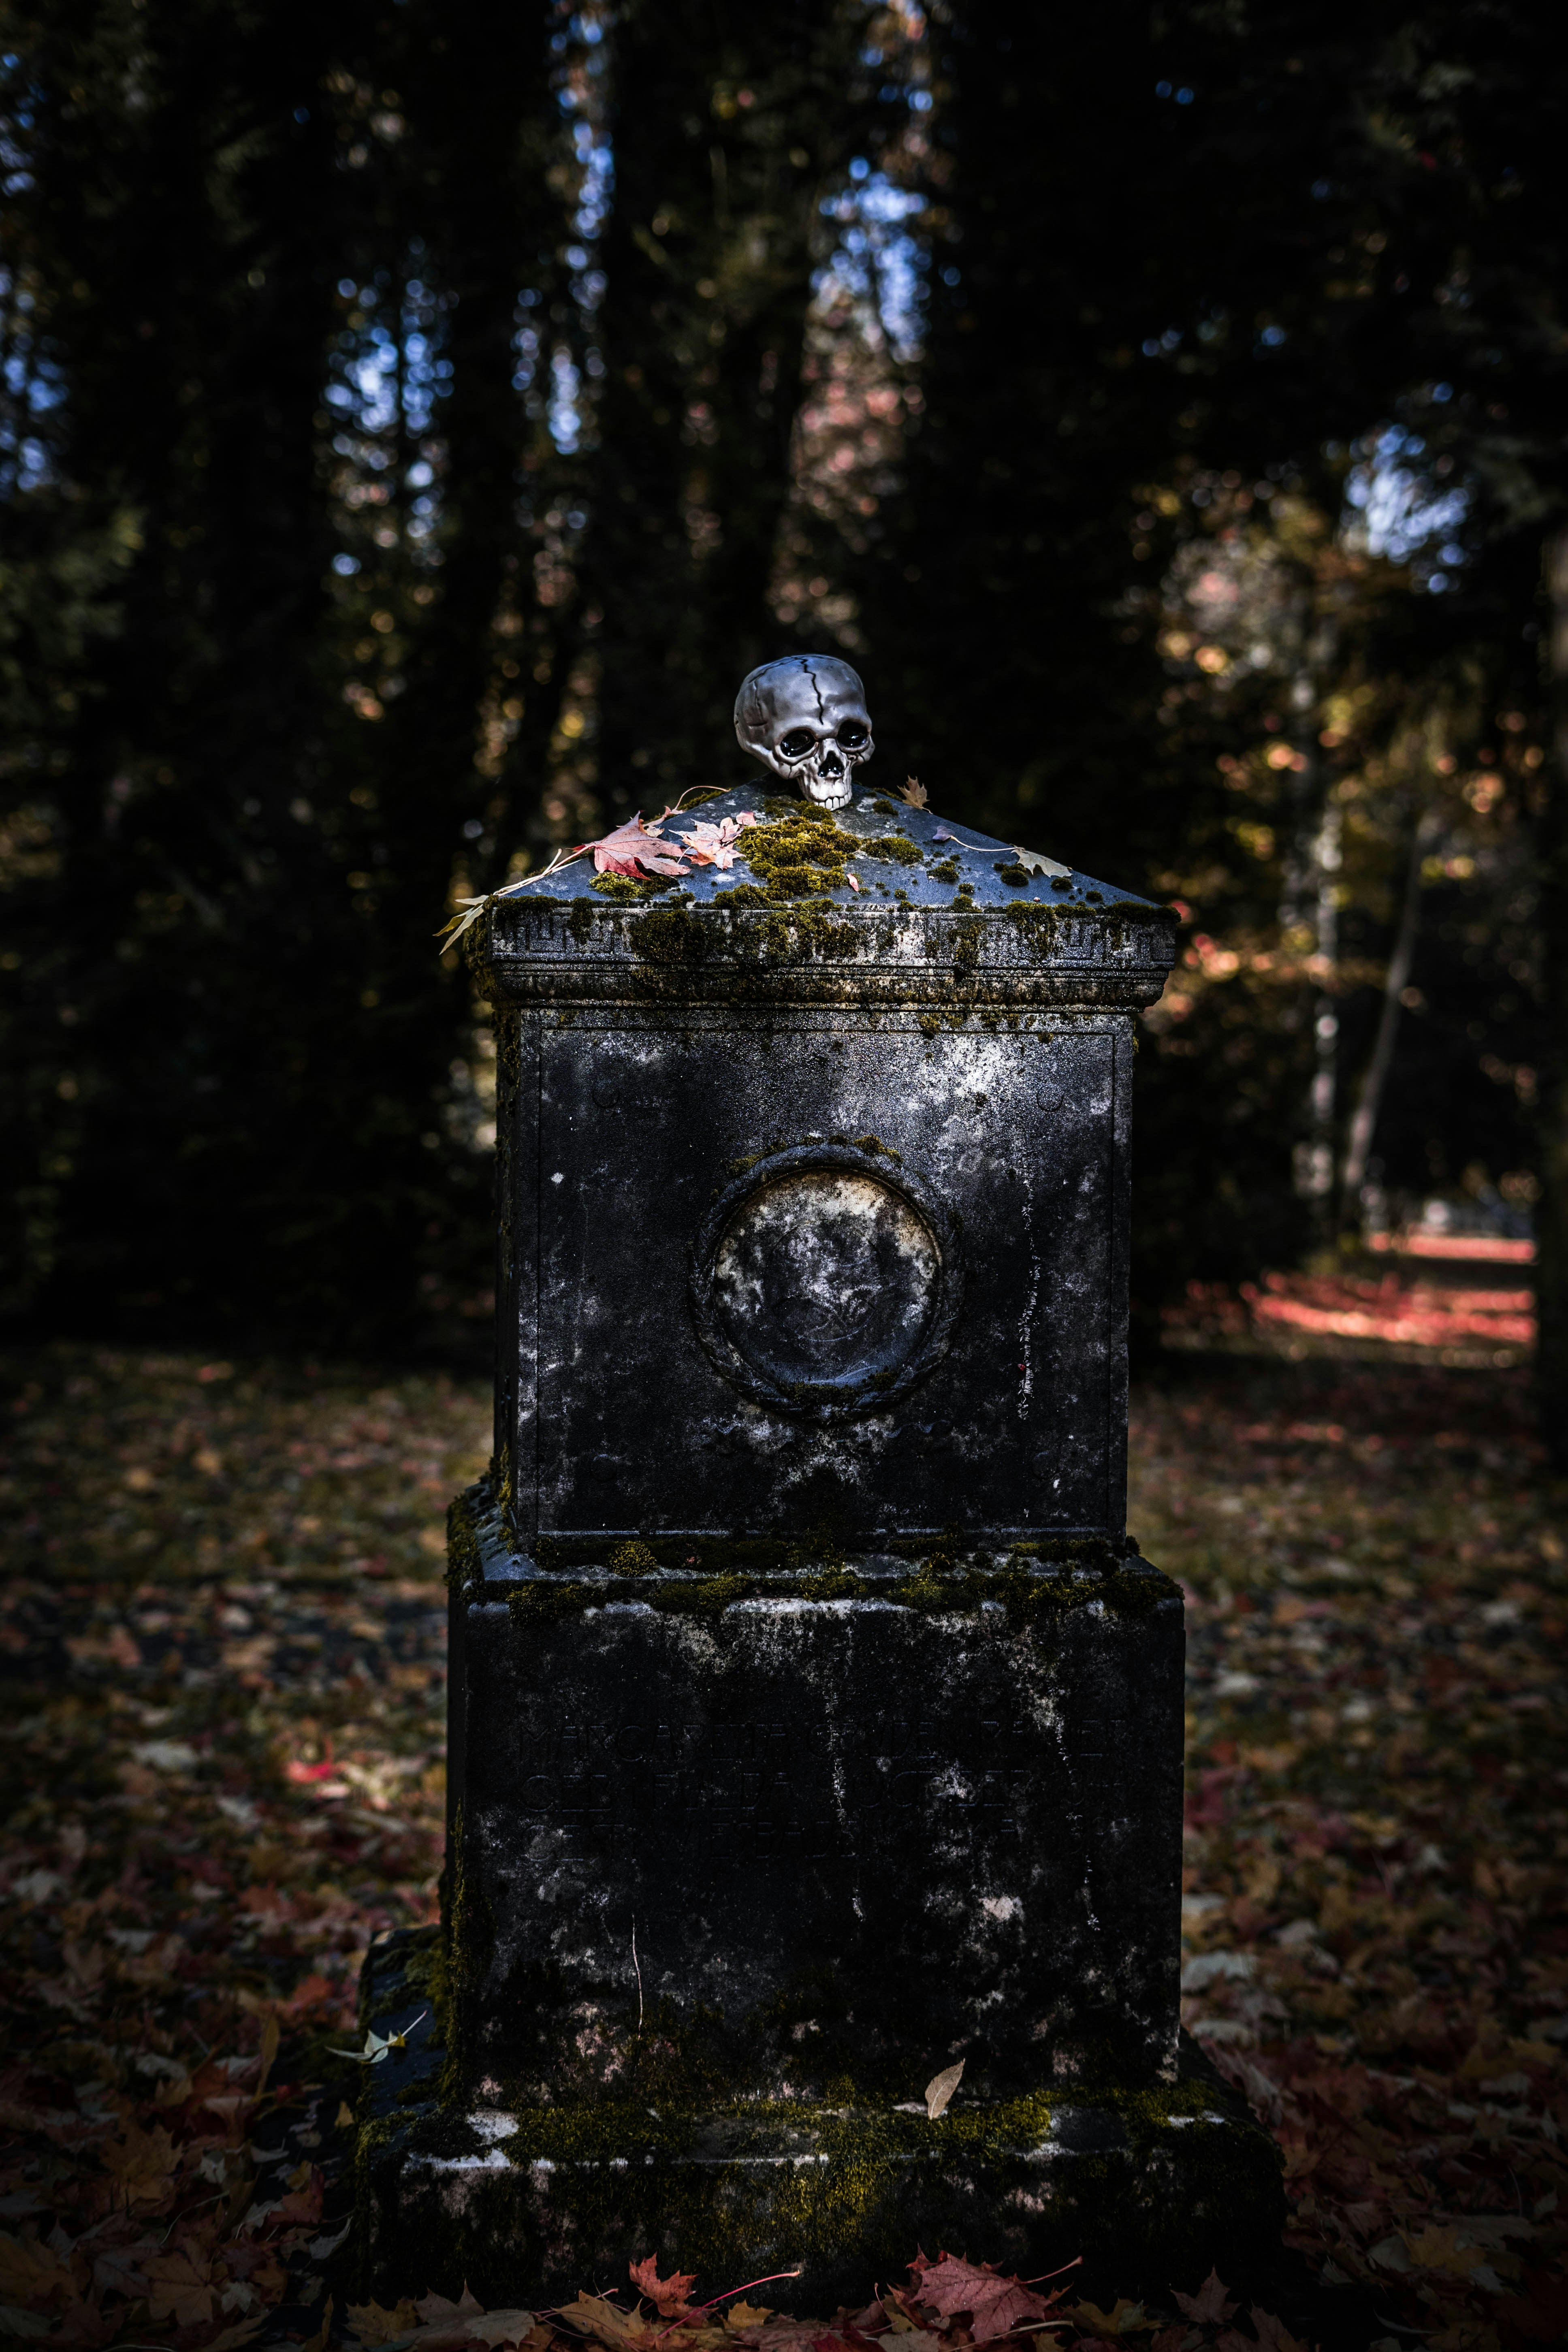 Dropbox, Twilio, Docusign, and the SaaS Investing Graveyard